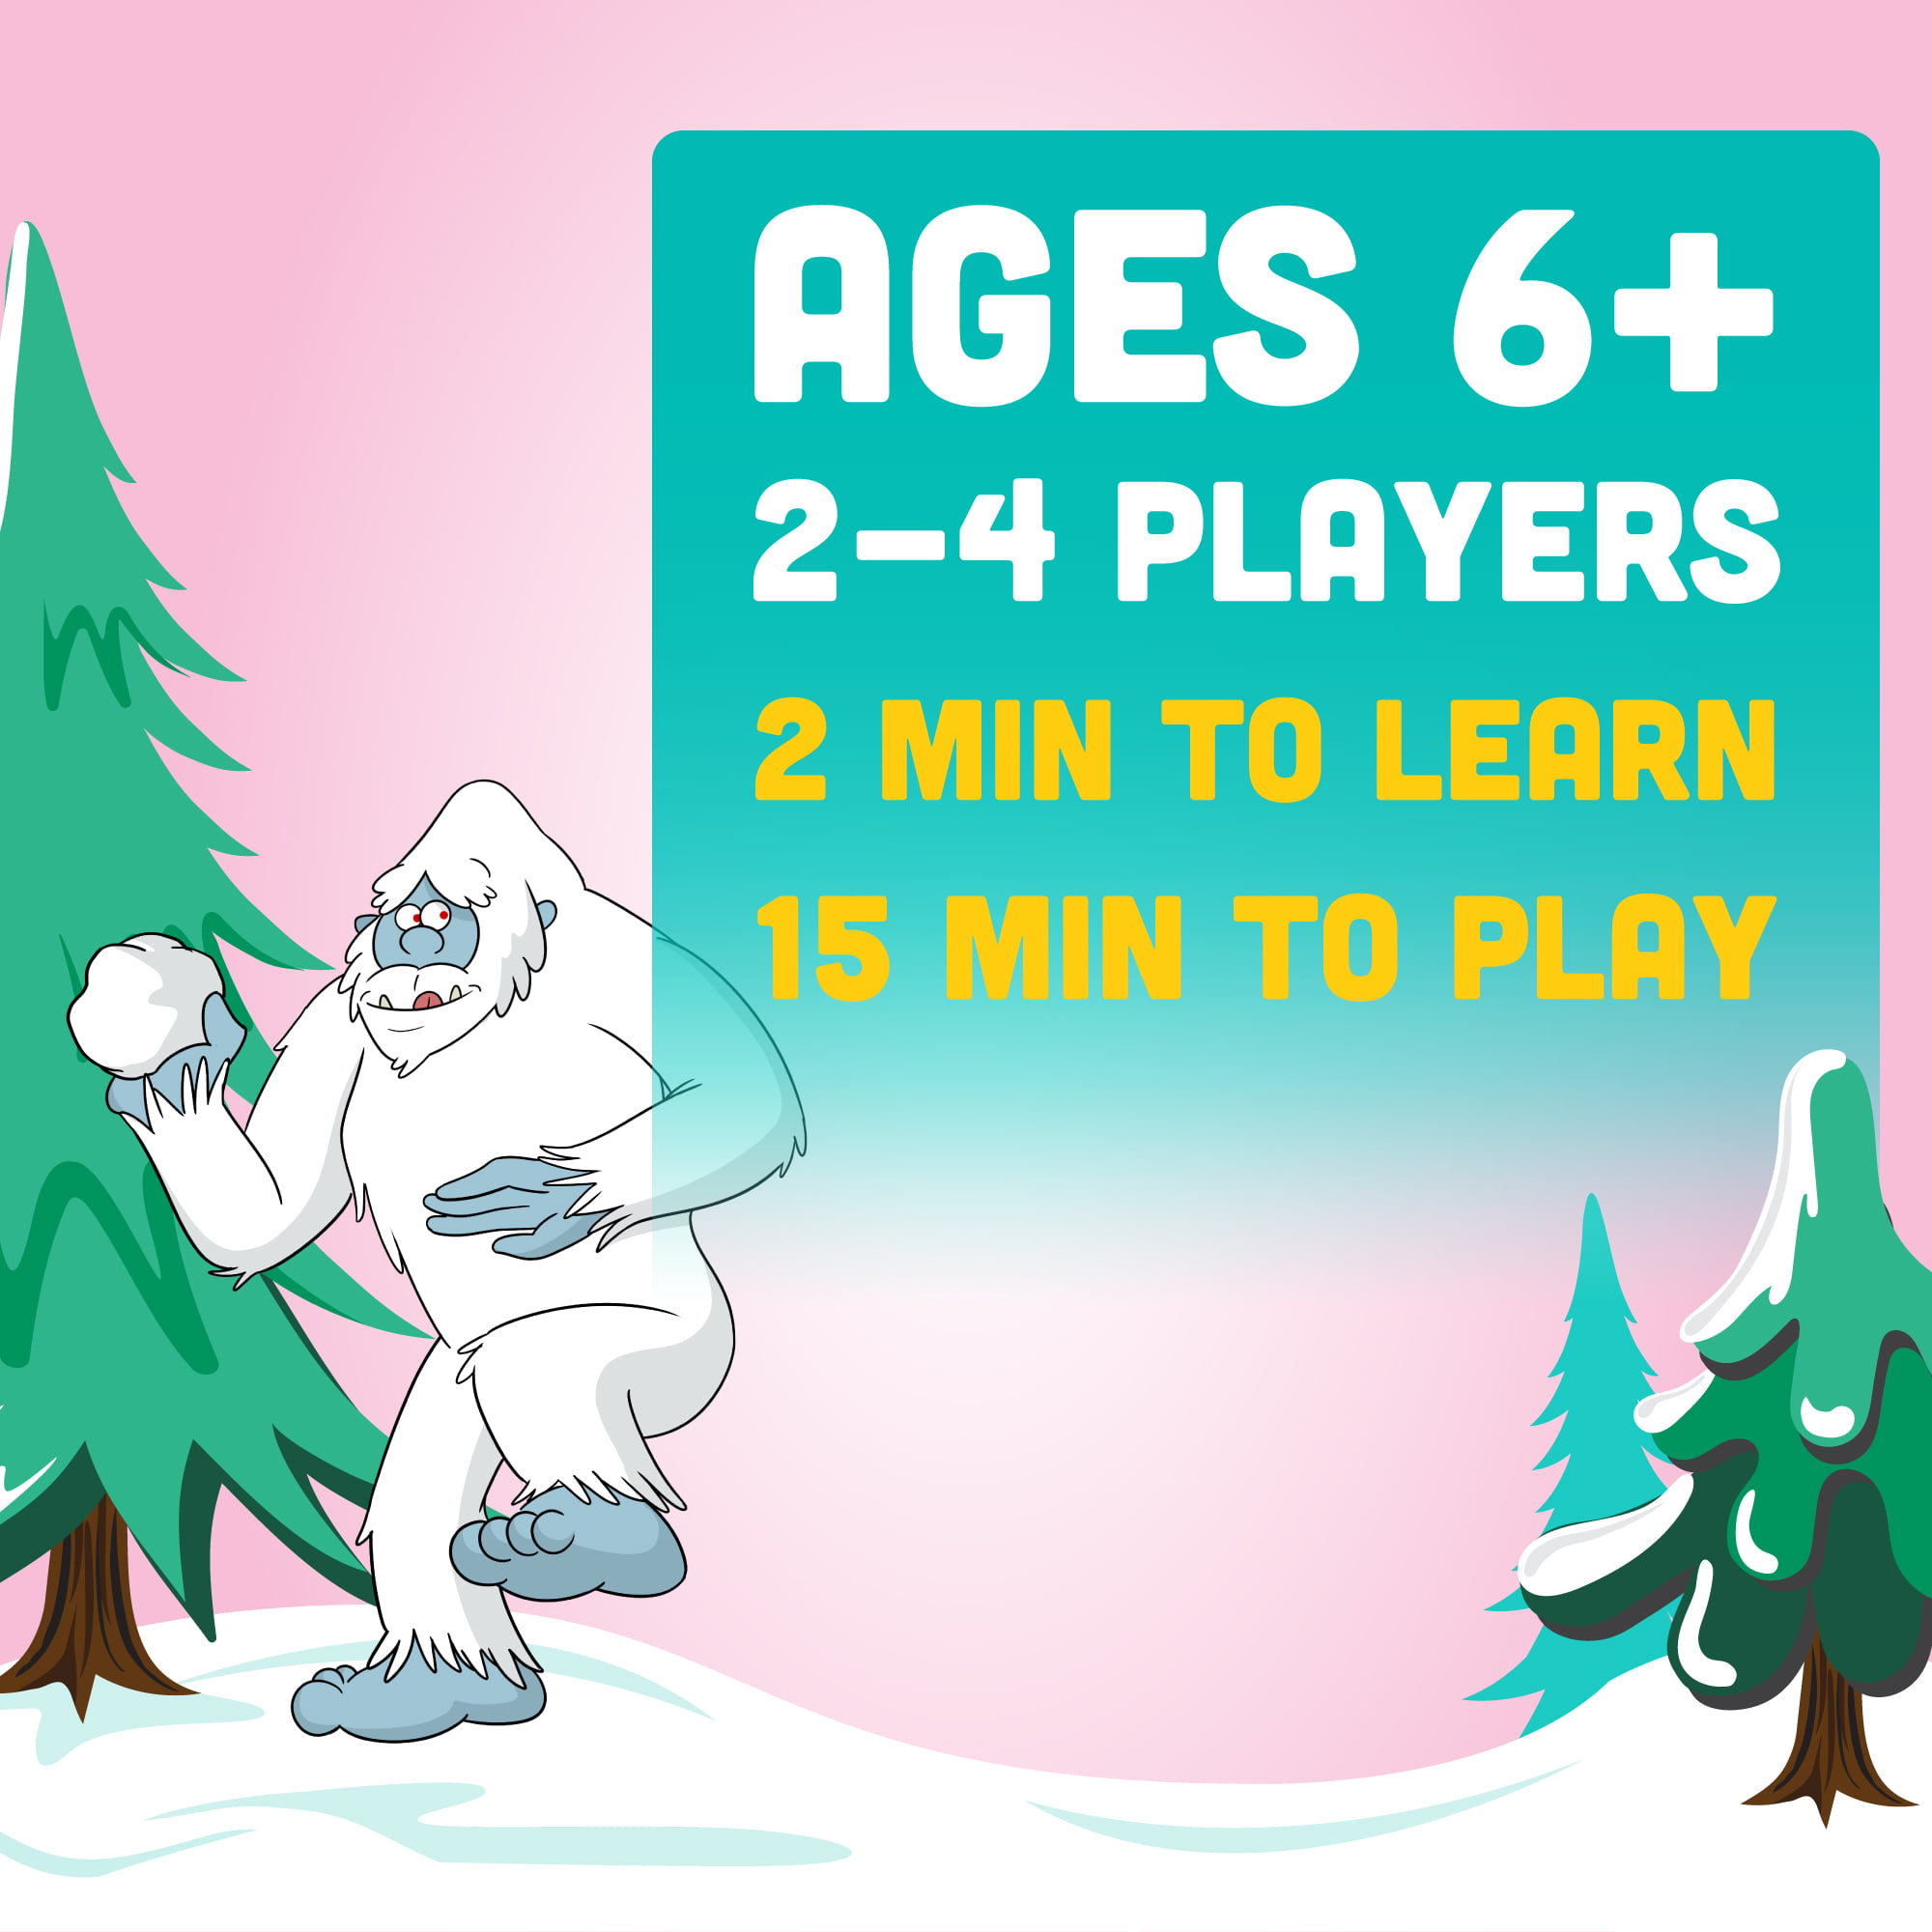 Christopher & Alyson  Games 4 Two on Instagram: Yeti Snowbrawl is an  amazing family game that should be a must try for your next gamenight!!  #boardgames #gamenight #familygames #familygamenight #kidsgames #couple  #games